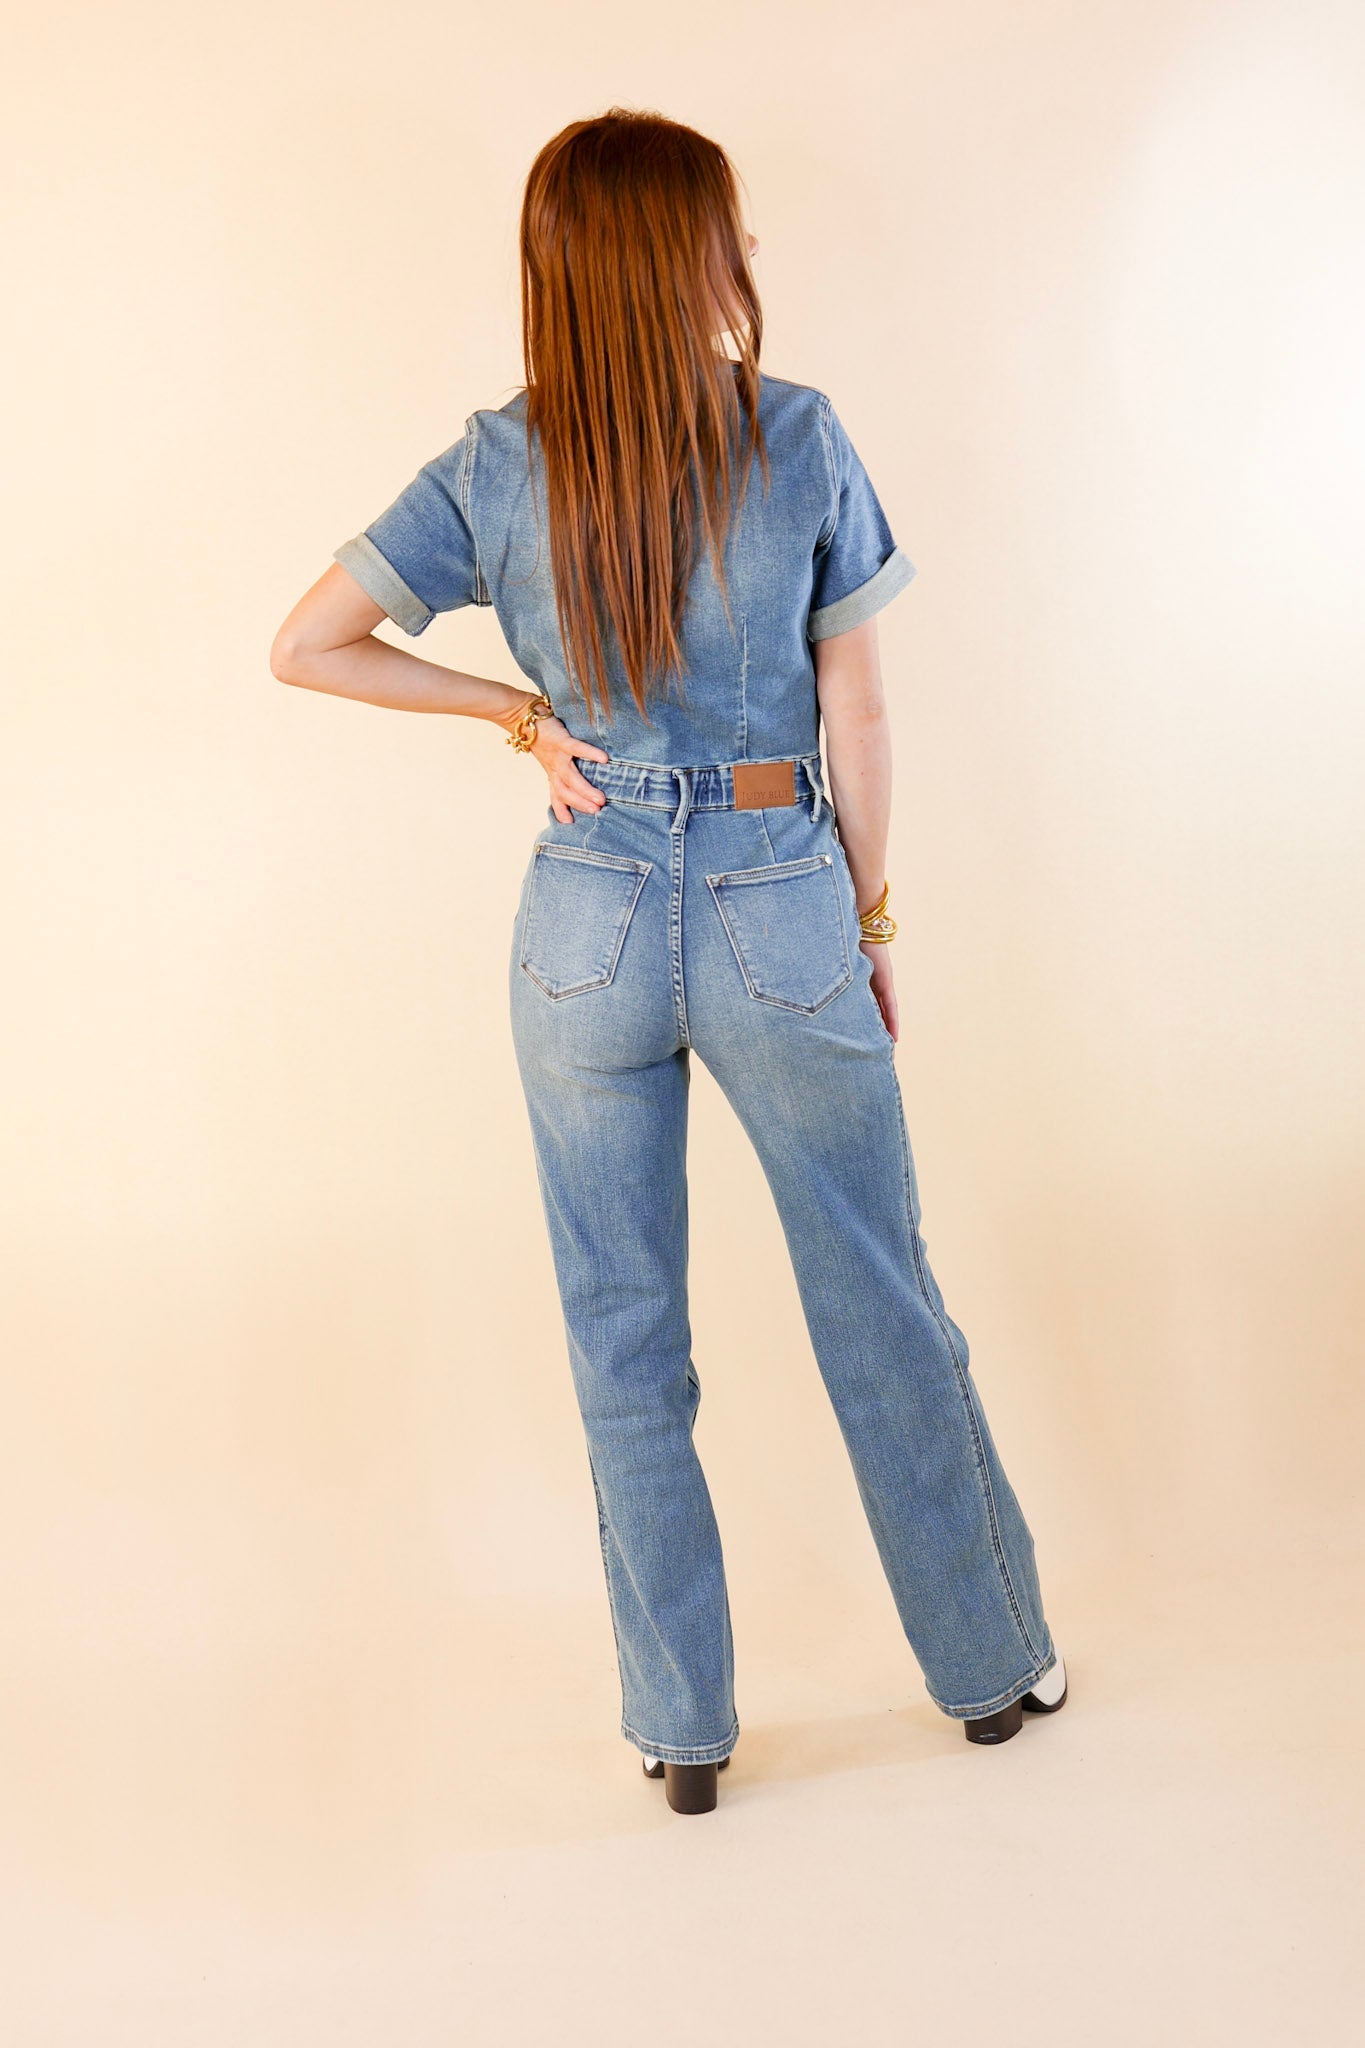 Judy Blue | New To The City Short Sleeve Denim Jumpsuit in Medium Wash - Giddy Up Glamour Boutique